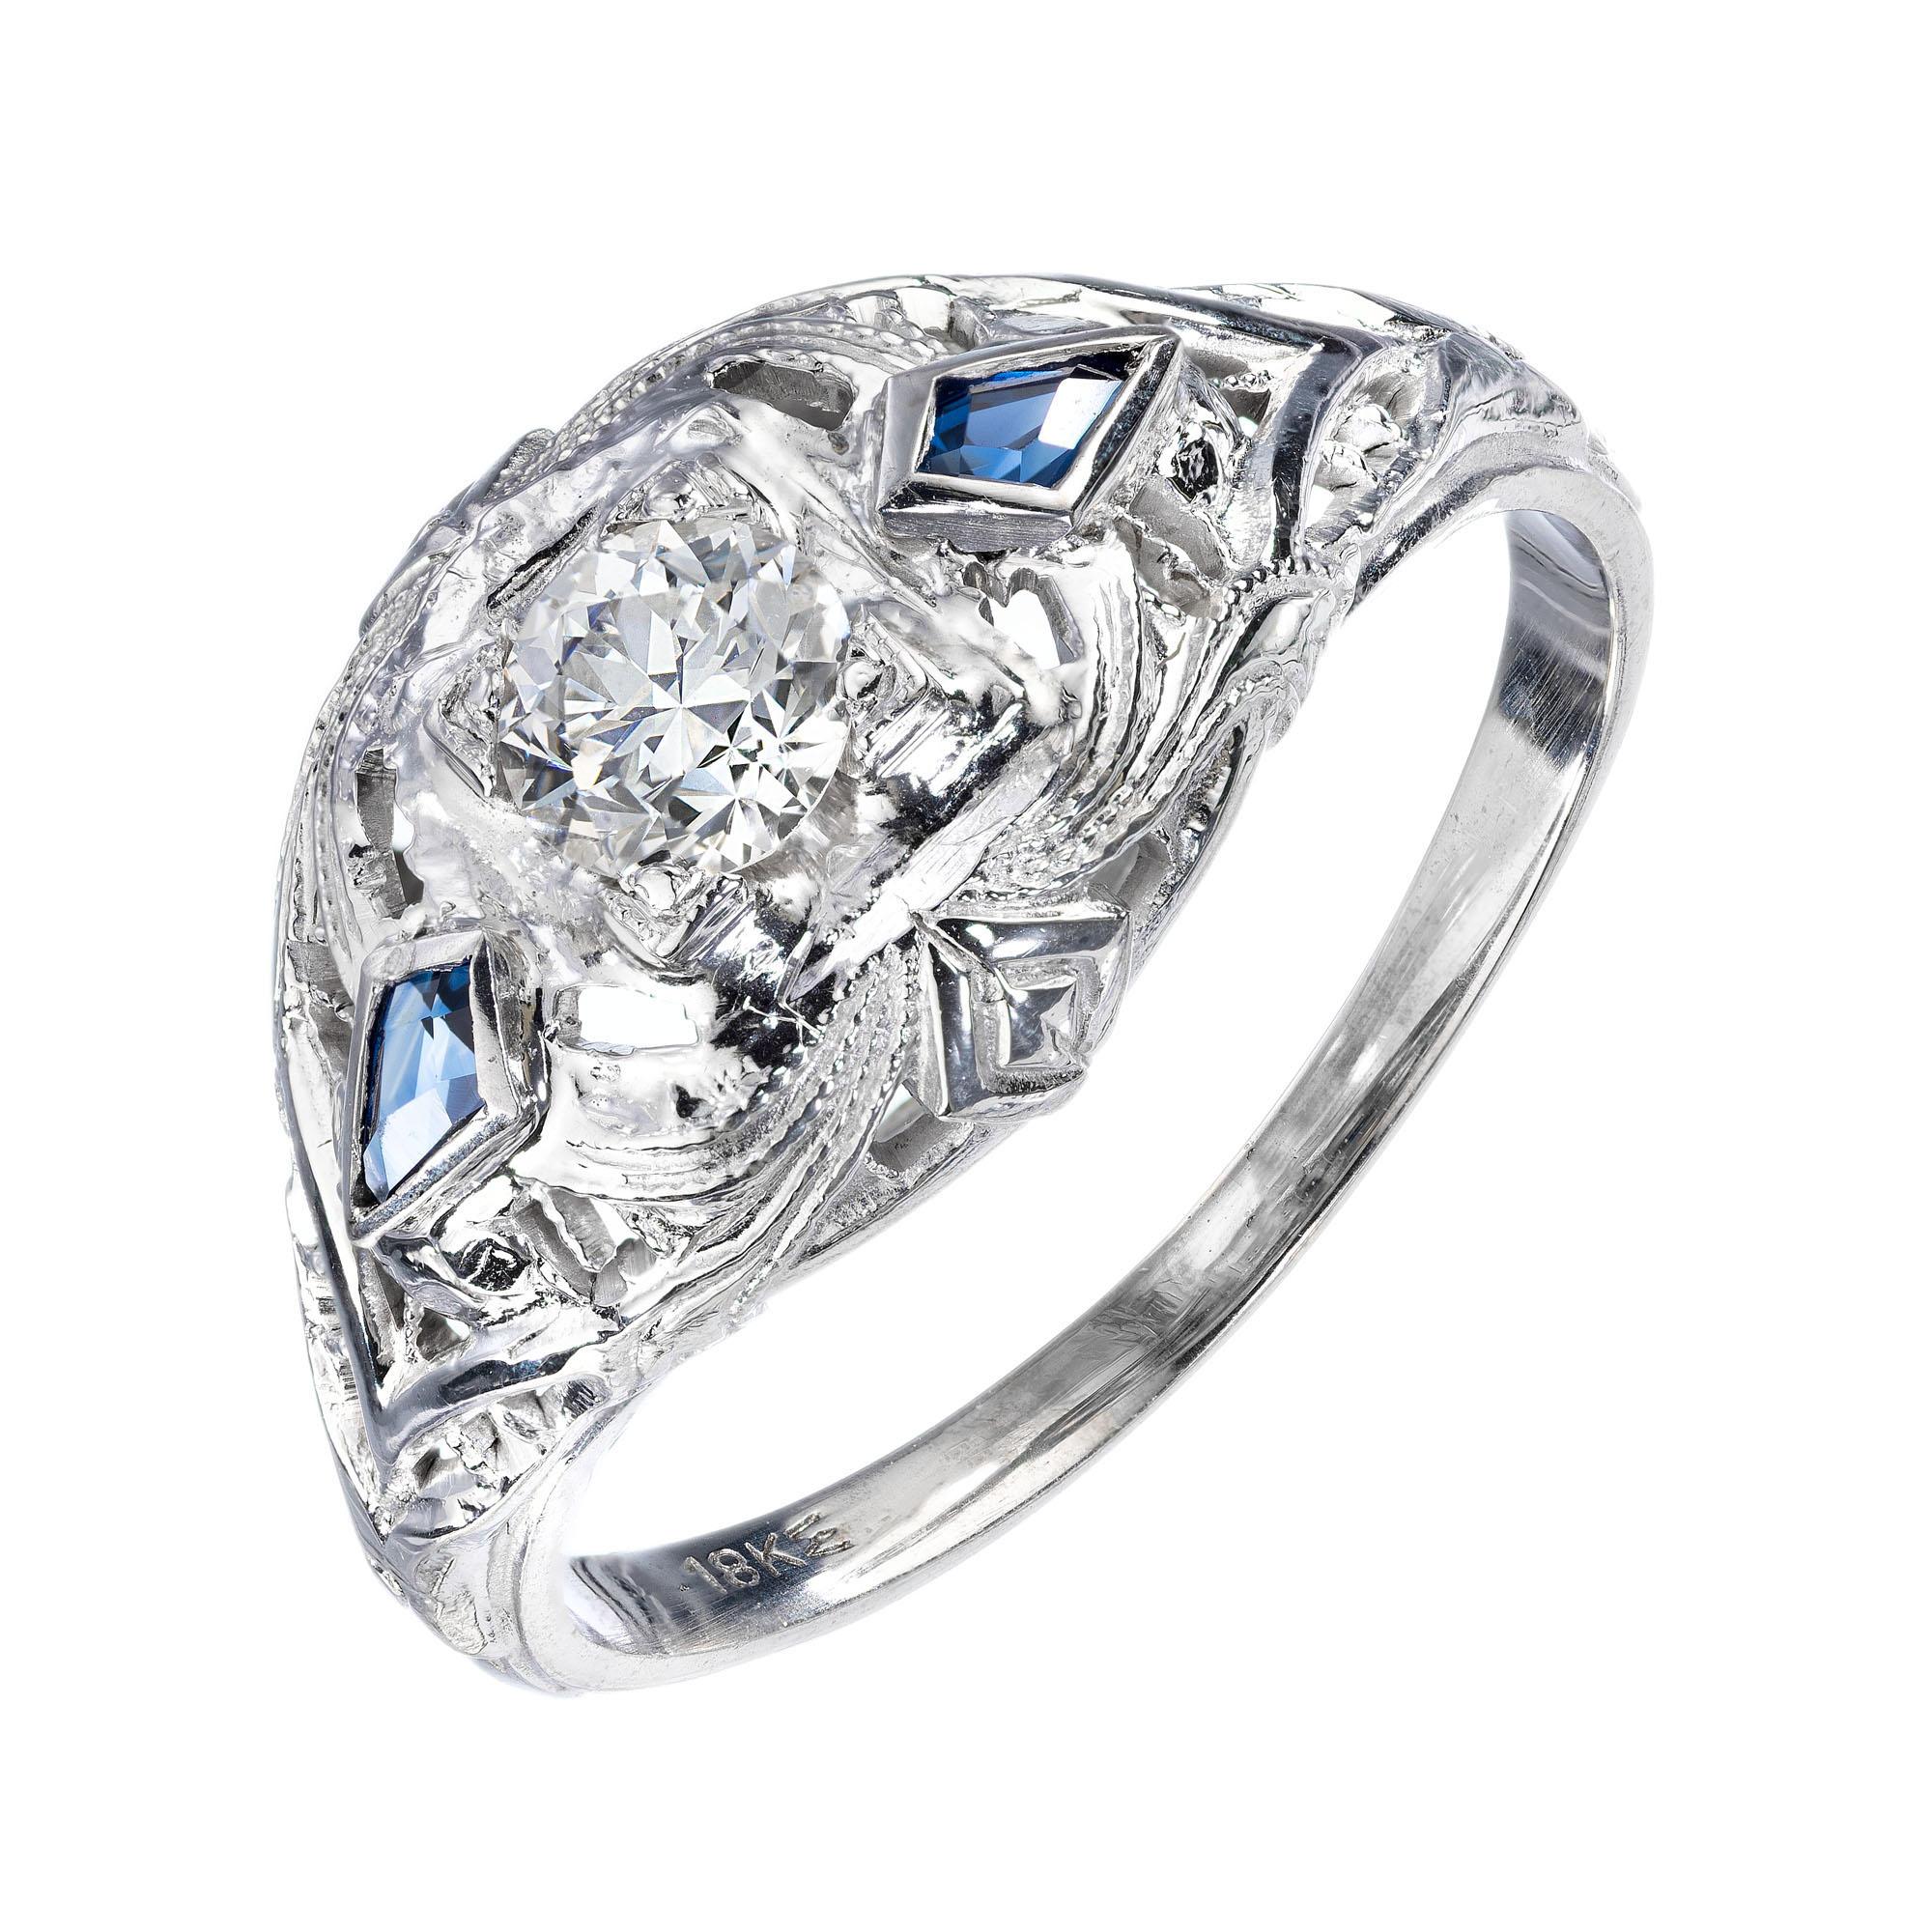 Vintage 1930's diamond and sapphire filigree engagement ring. Dome style with a old euro center stone and two kite shaped calibre cut sapphires in a 18k white gold setting. 

1 old European cut diamond, I SI approx. .25ct
2 calibre cut kite shape